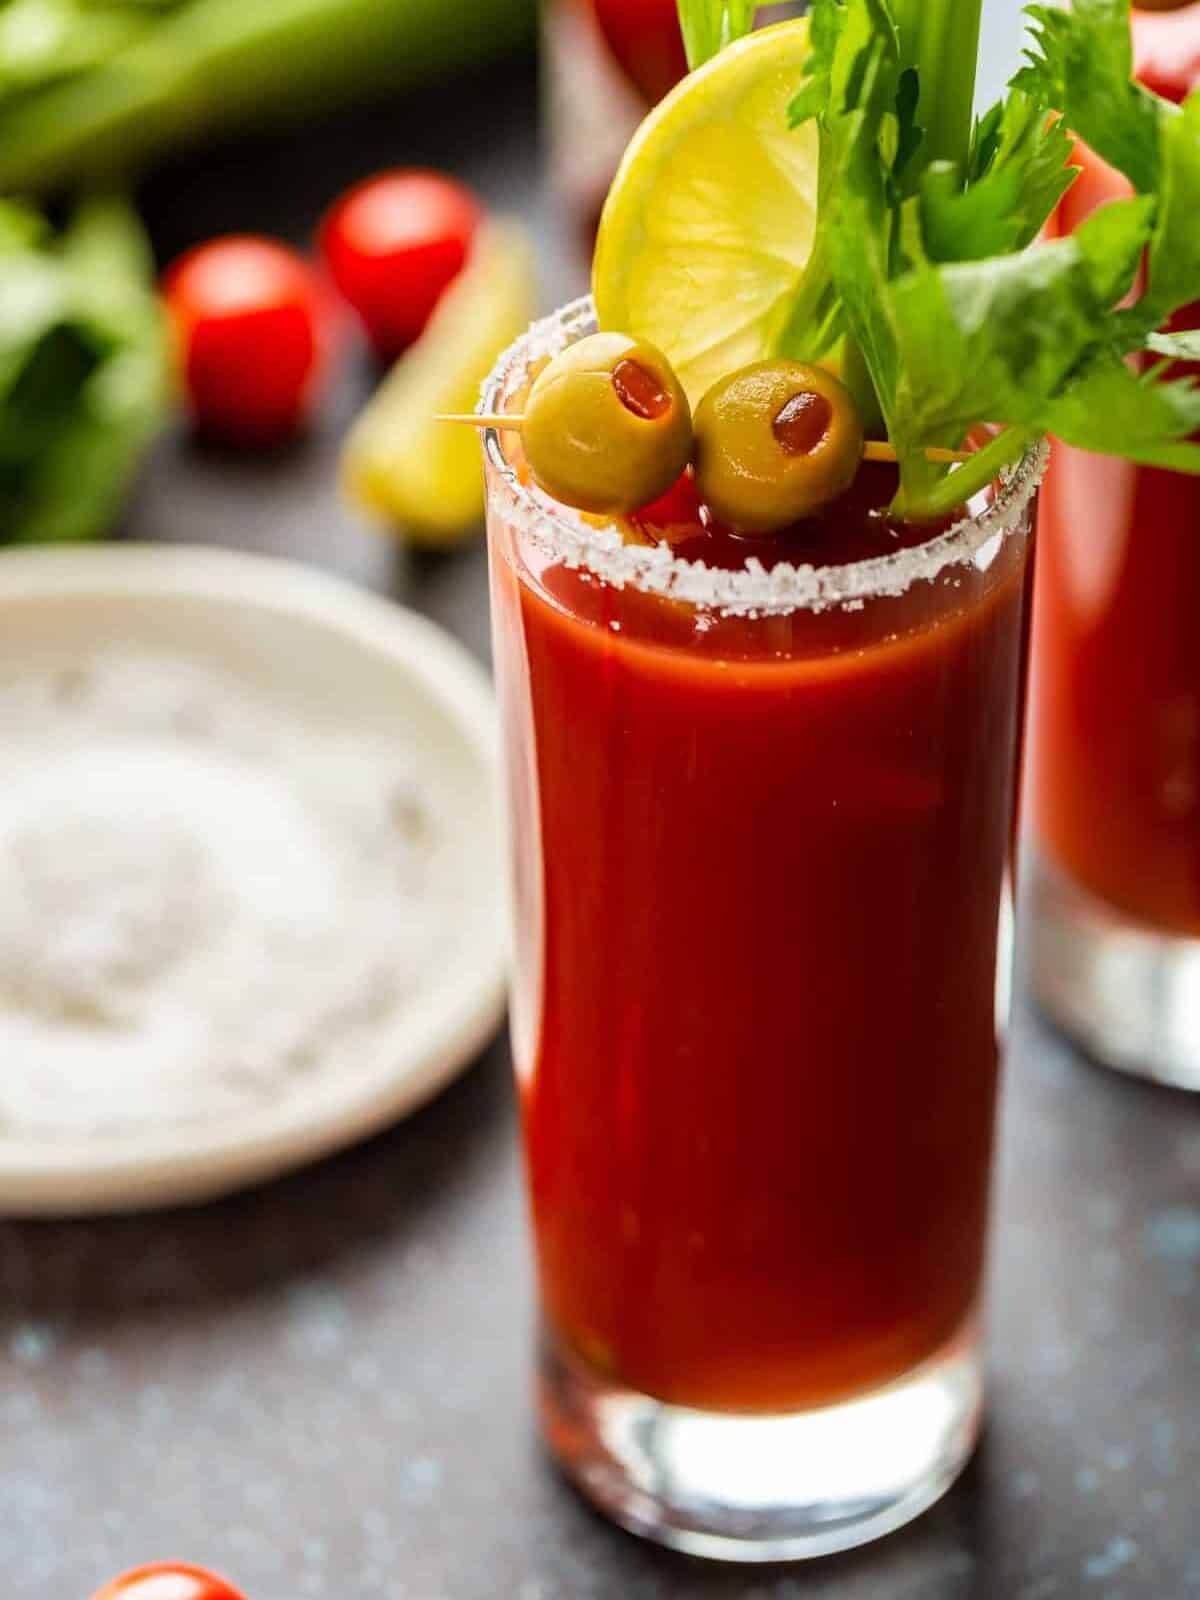 https://www.thecookierookie.com/wp-content/uploads/2023/05/Stovetop-Bloody-Mary-edited.jpg